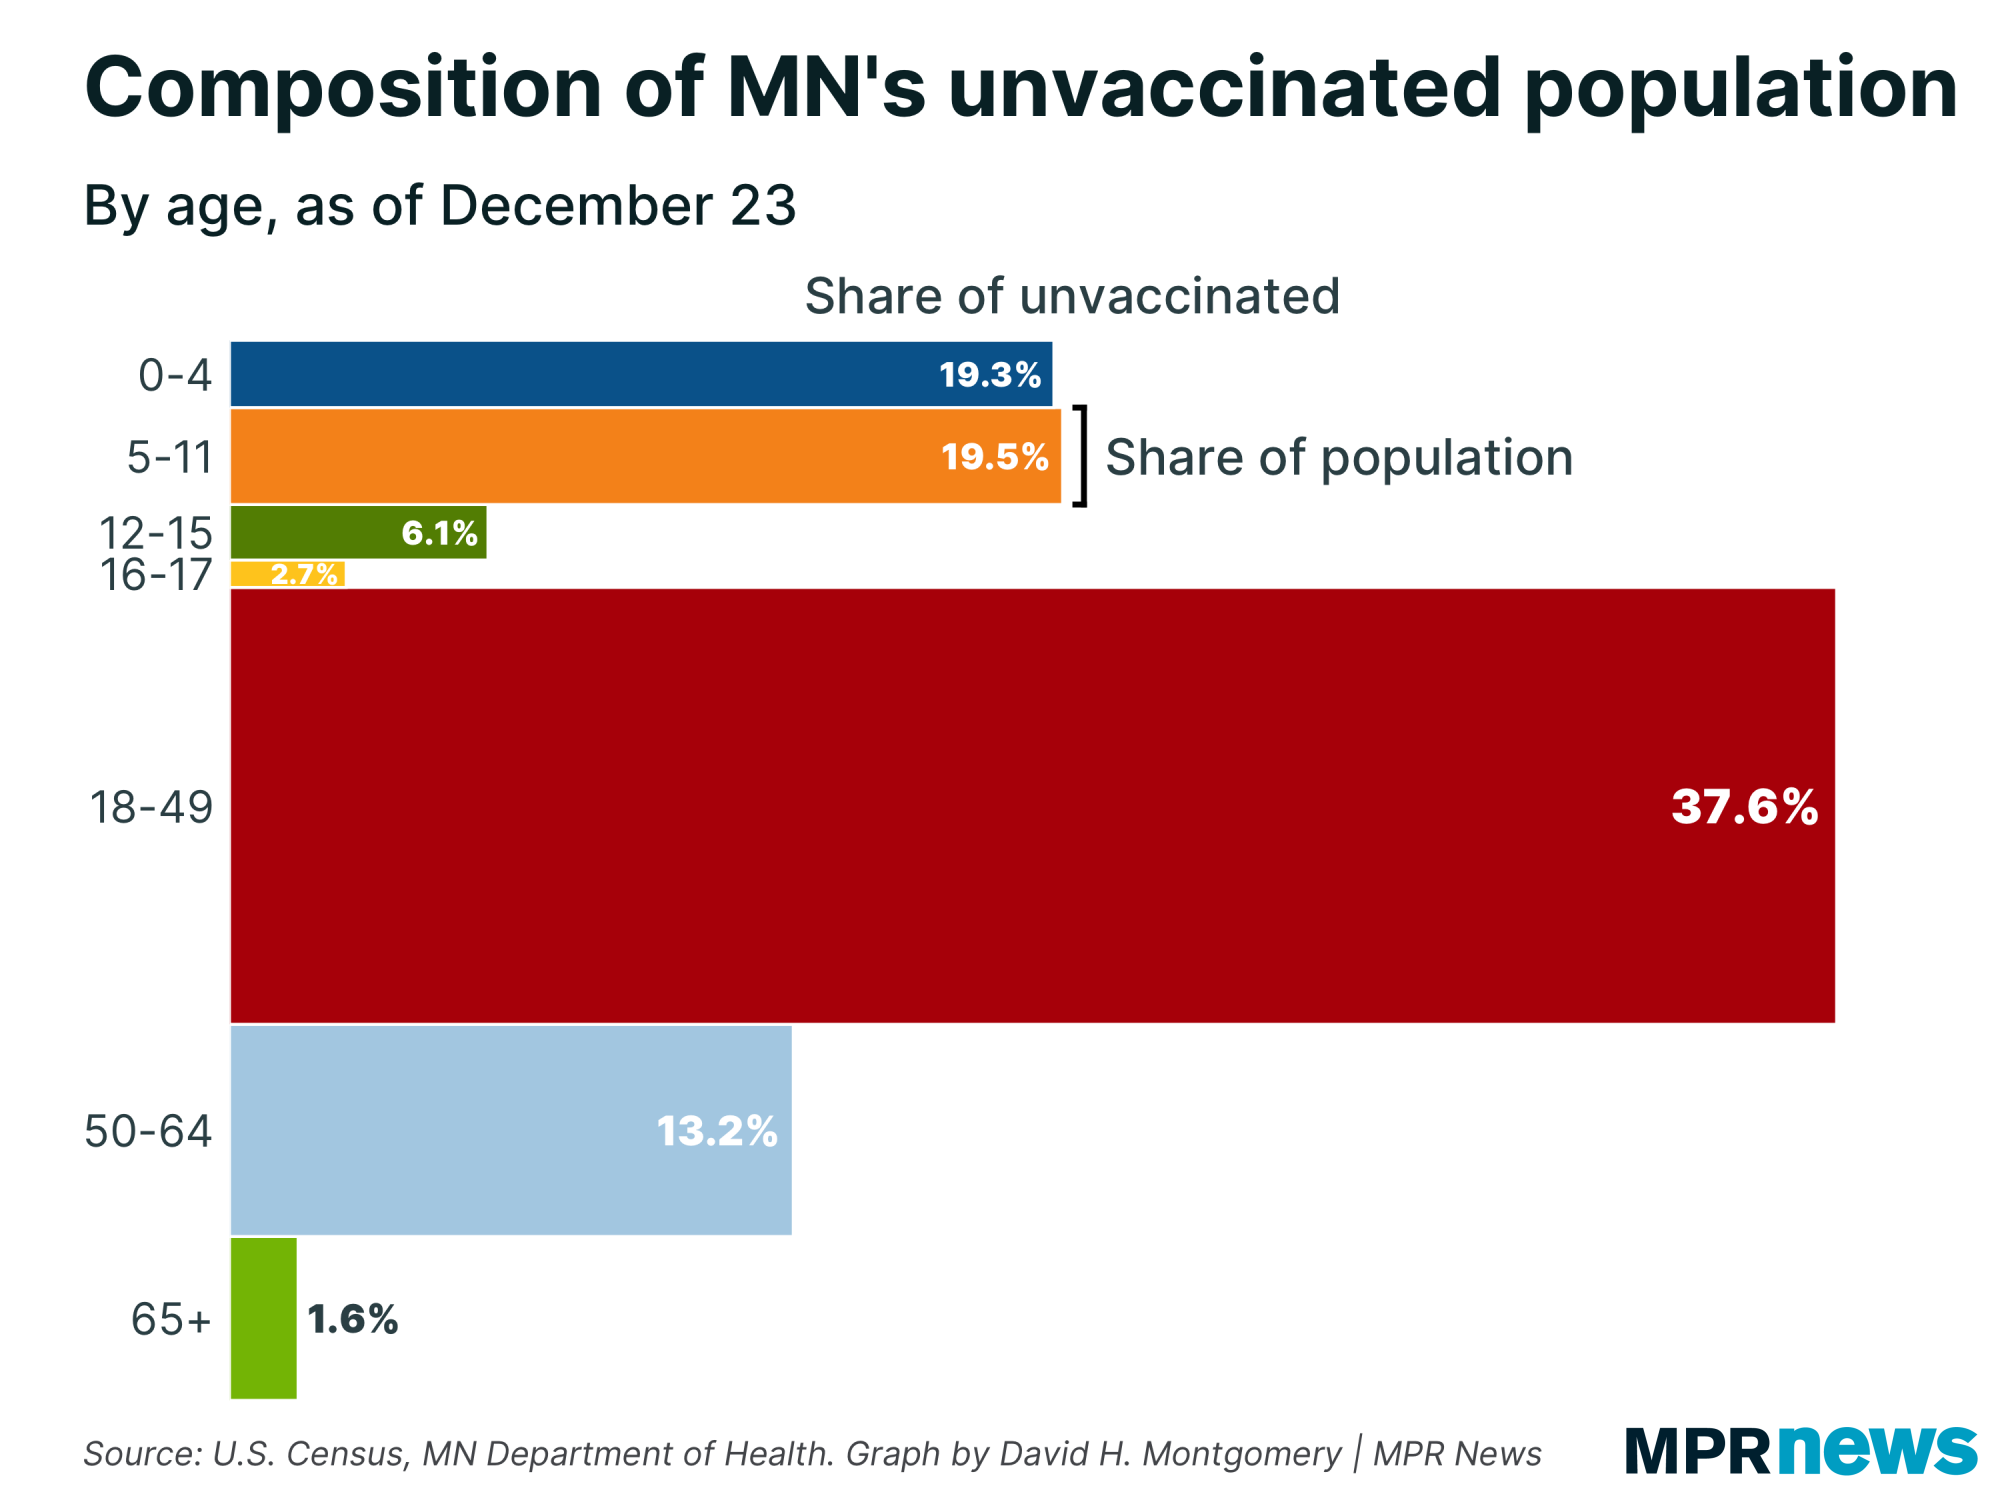 Graph of the age breakdown of Minnesota's unvaccinated population